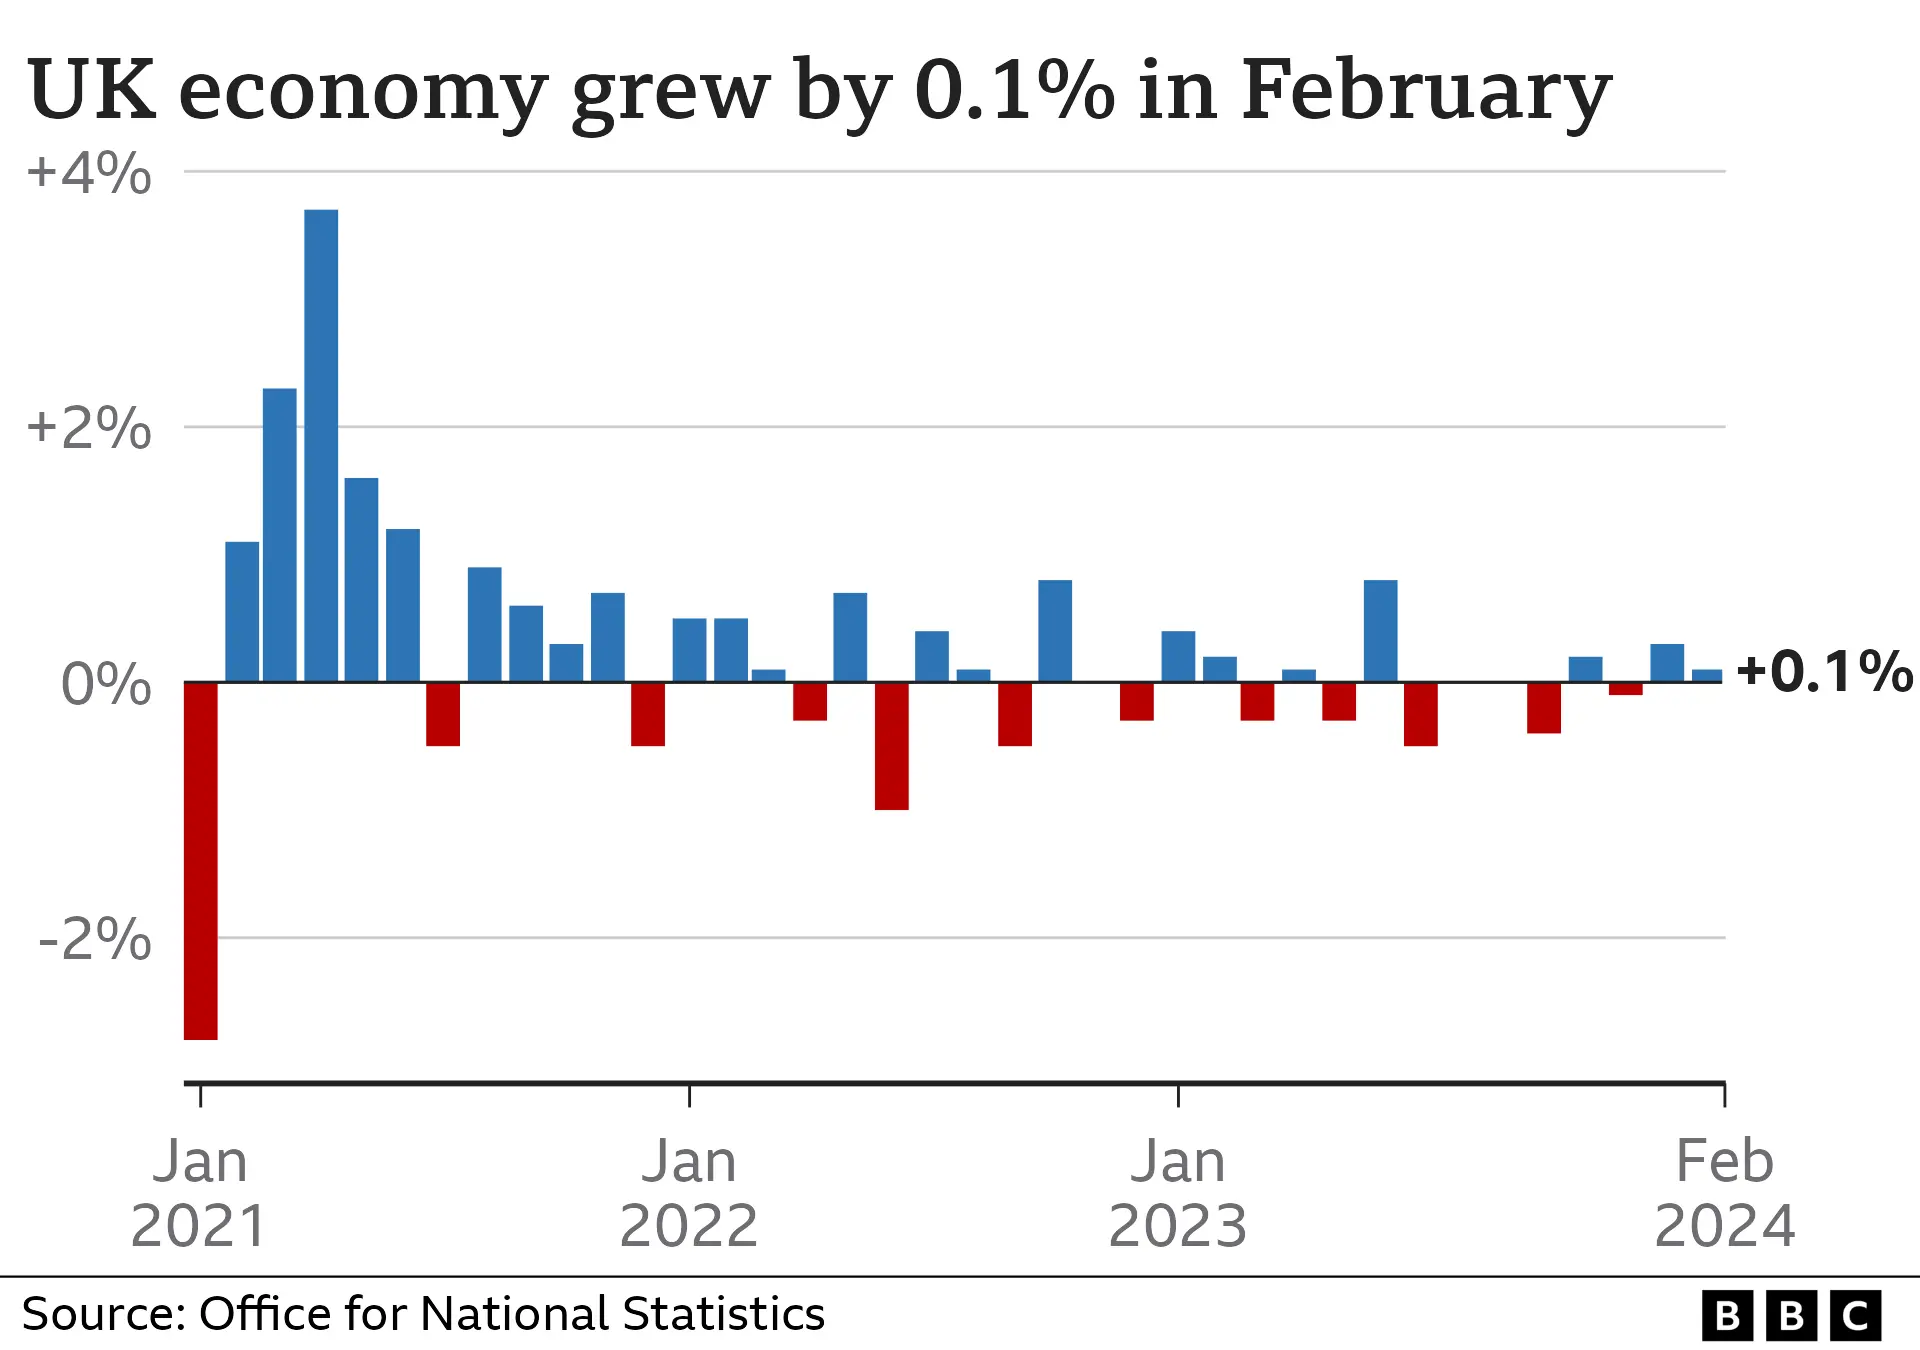 Bar chart showing the growth of the UK economy. In February, it is estimated to have grown by 0.1%.